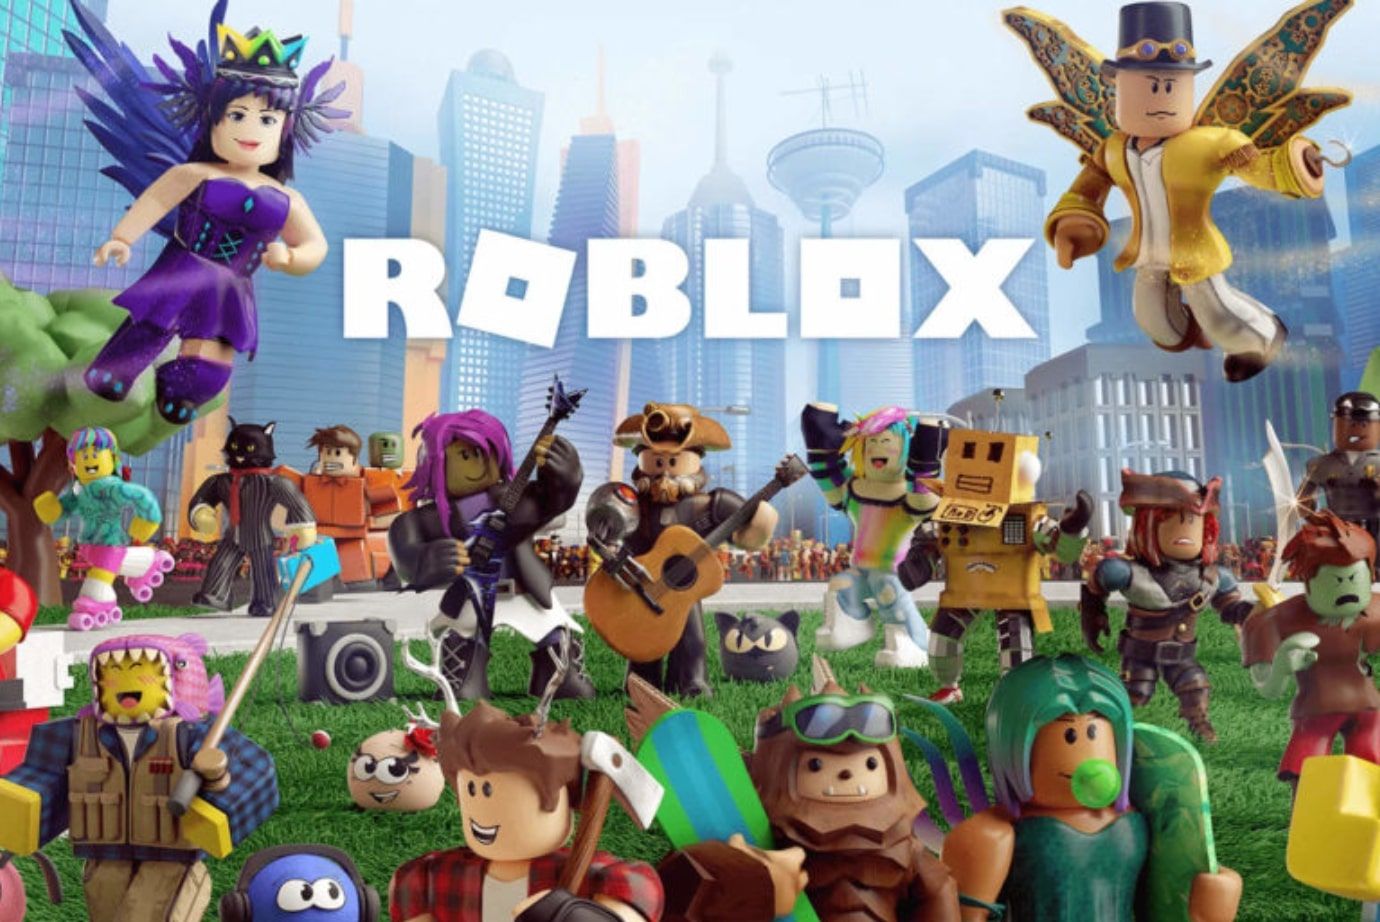 Roblox September 2020 Promo Codes New Cosmetics All Active Codes Backpacks Crystalline Companion More - all roblox promocodes september 2020